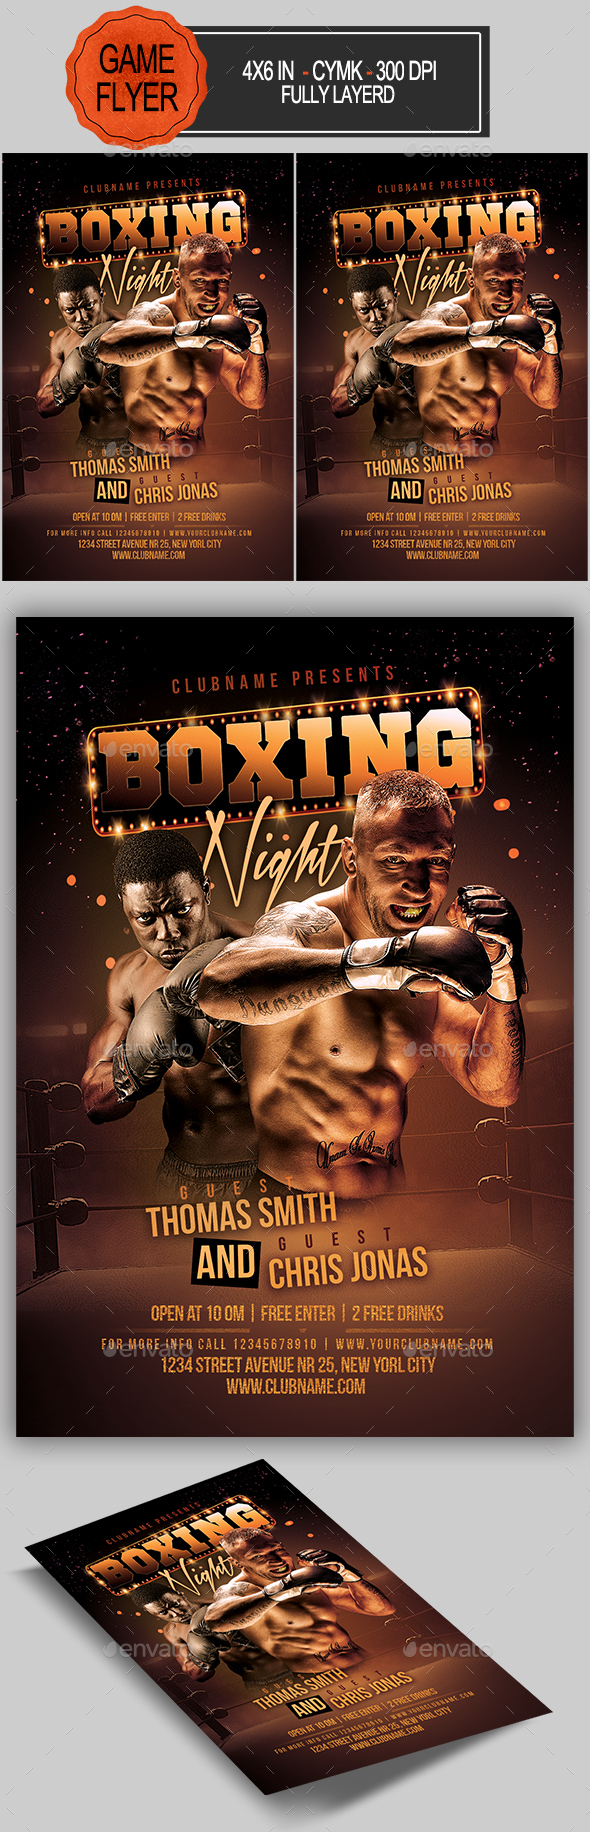 Boxing Game Flyer